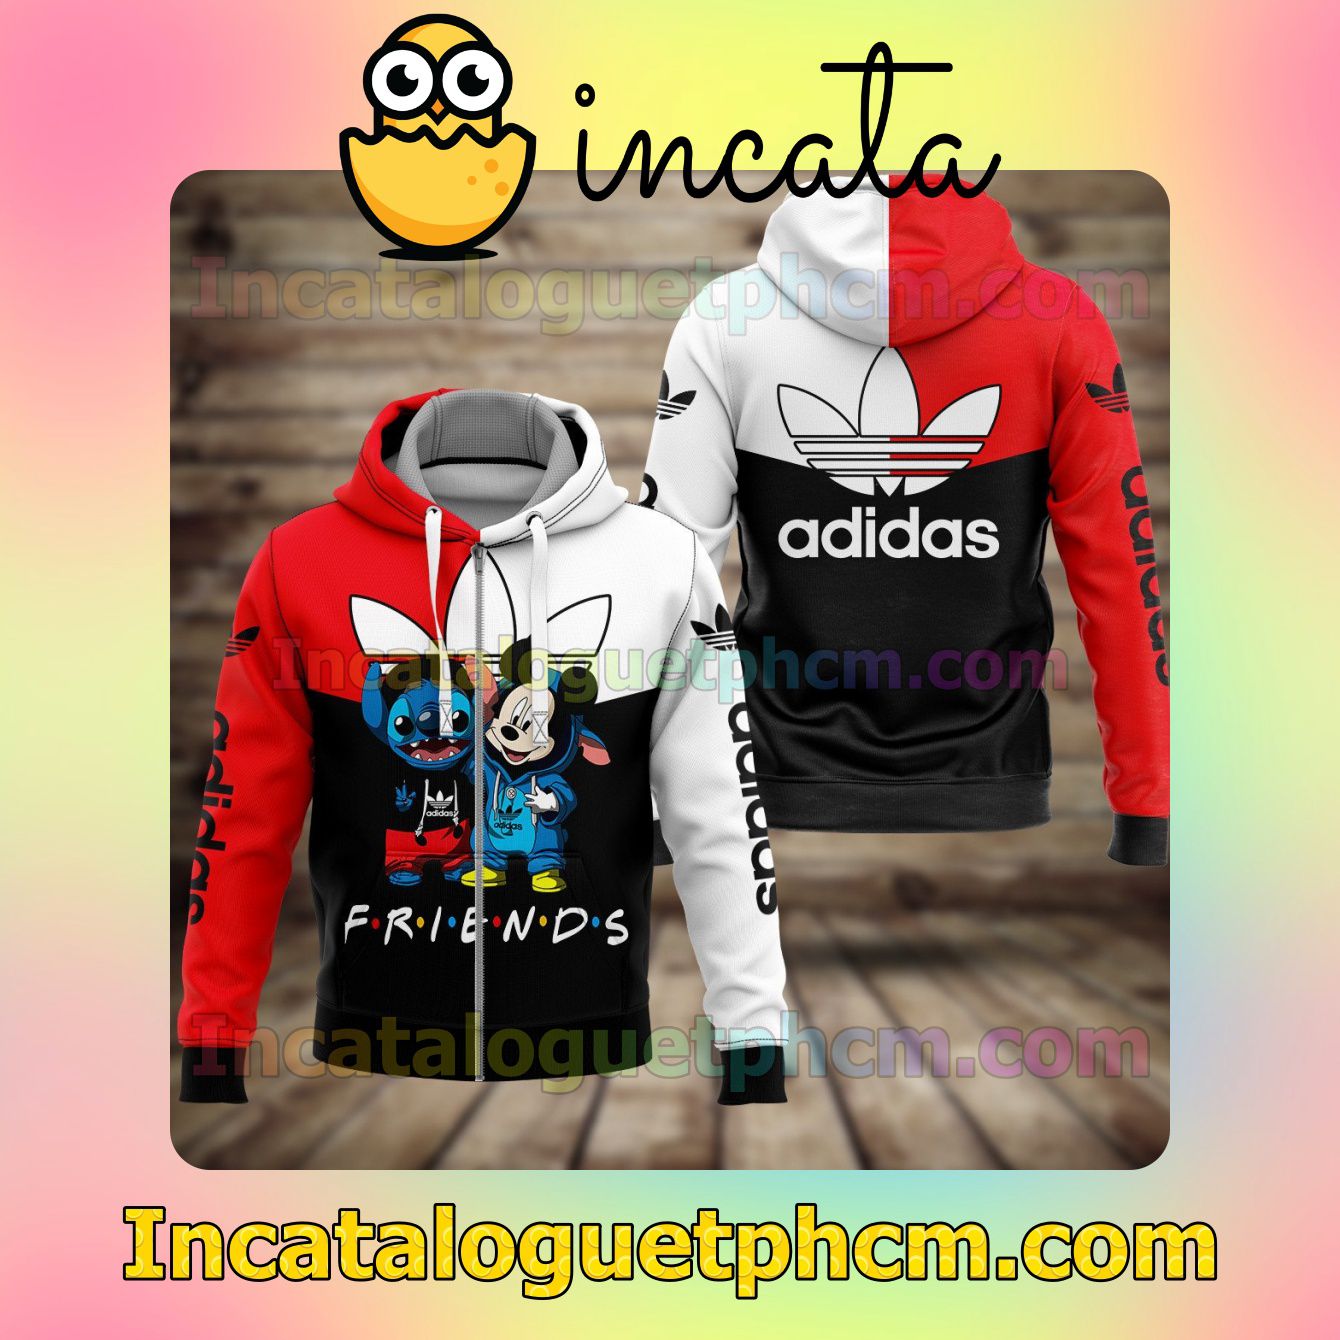 Adidas Stitch And Mickey Friends Black White Red Long Sleeve Jacket Mens Hoodie